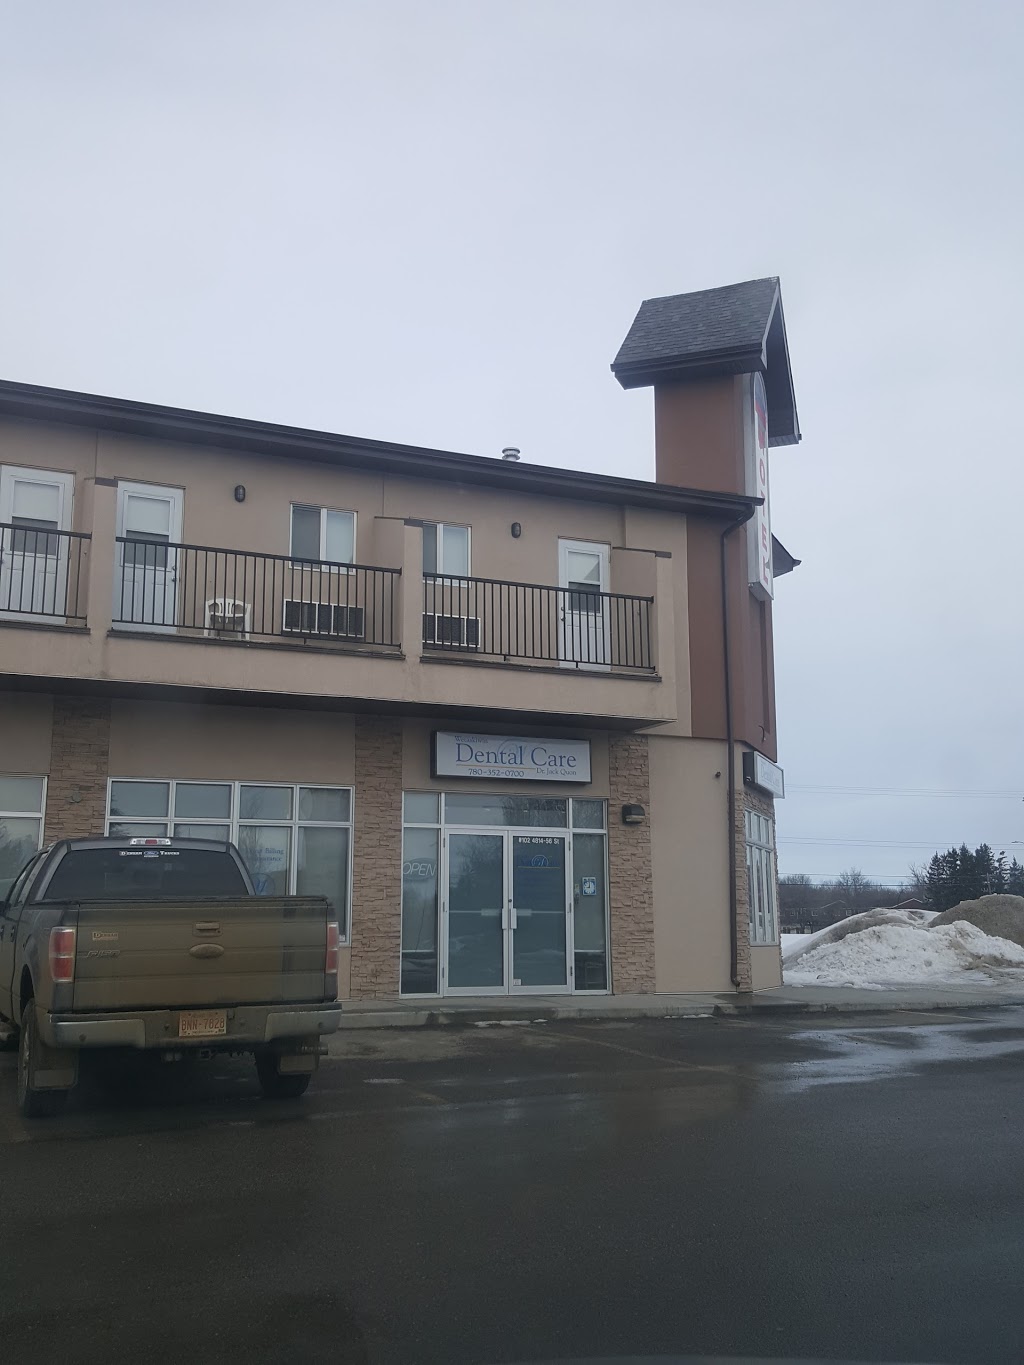 Quon Jack Dr | 4814 56 St, Wetaskiwin, AB T9A 1V8, Canada | Phone: (780) 352-0700